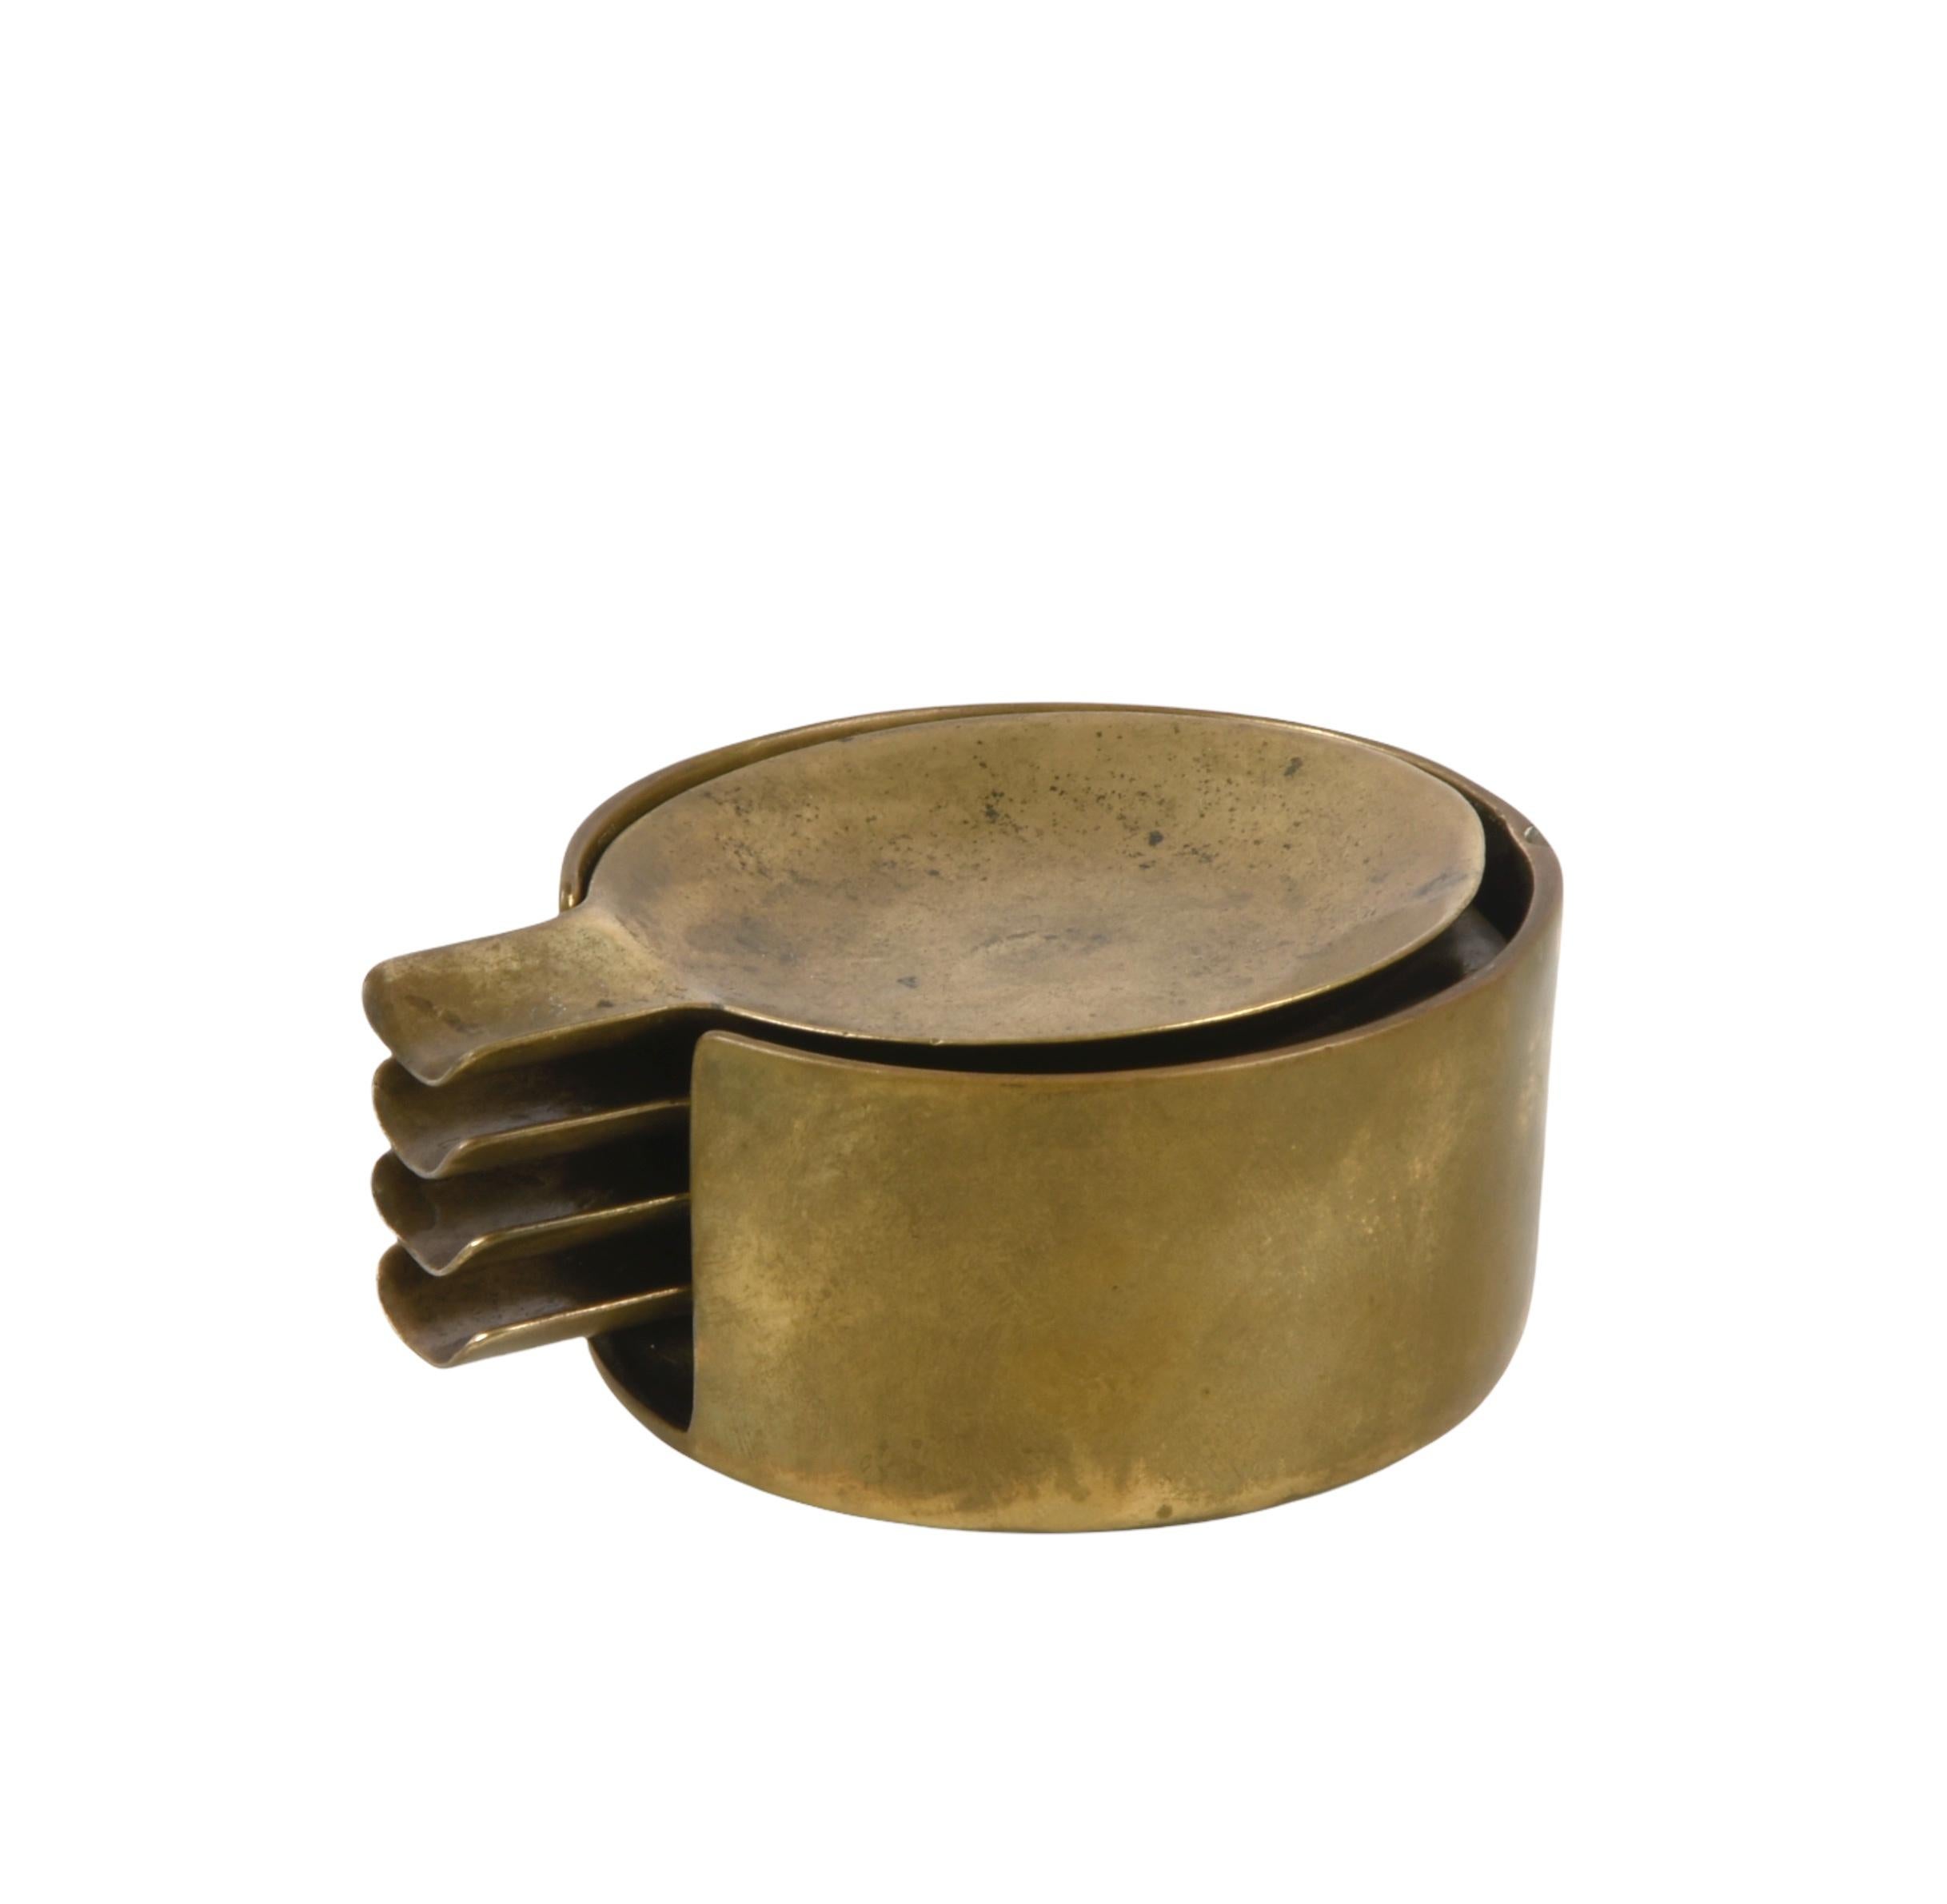 Beautiful set of four stackable ashtrays in solid brass. This set was produced in Austria during the 1950s after Adnet.

This set is magnificent because of the reflection of the solid brass and the four ashtrays that can be stacked into the main